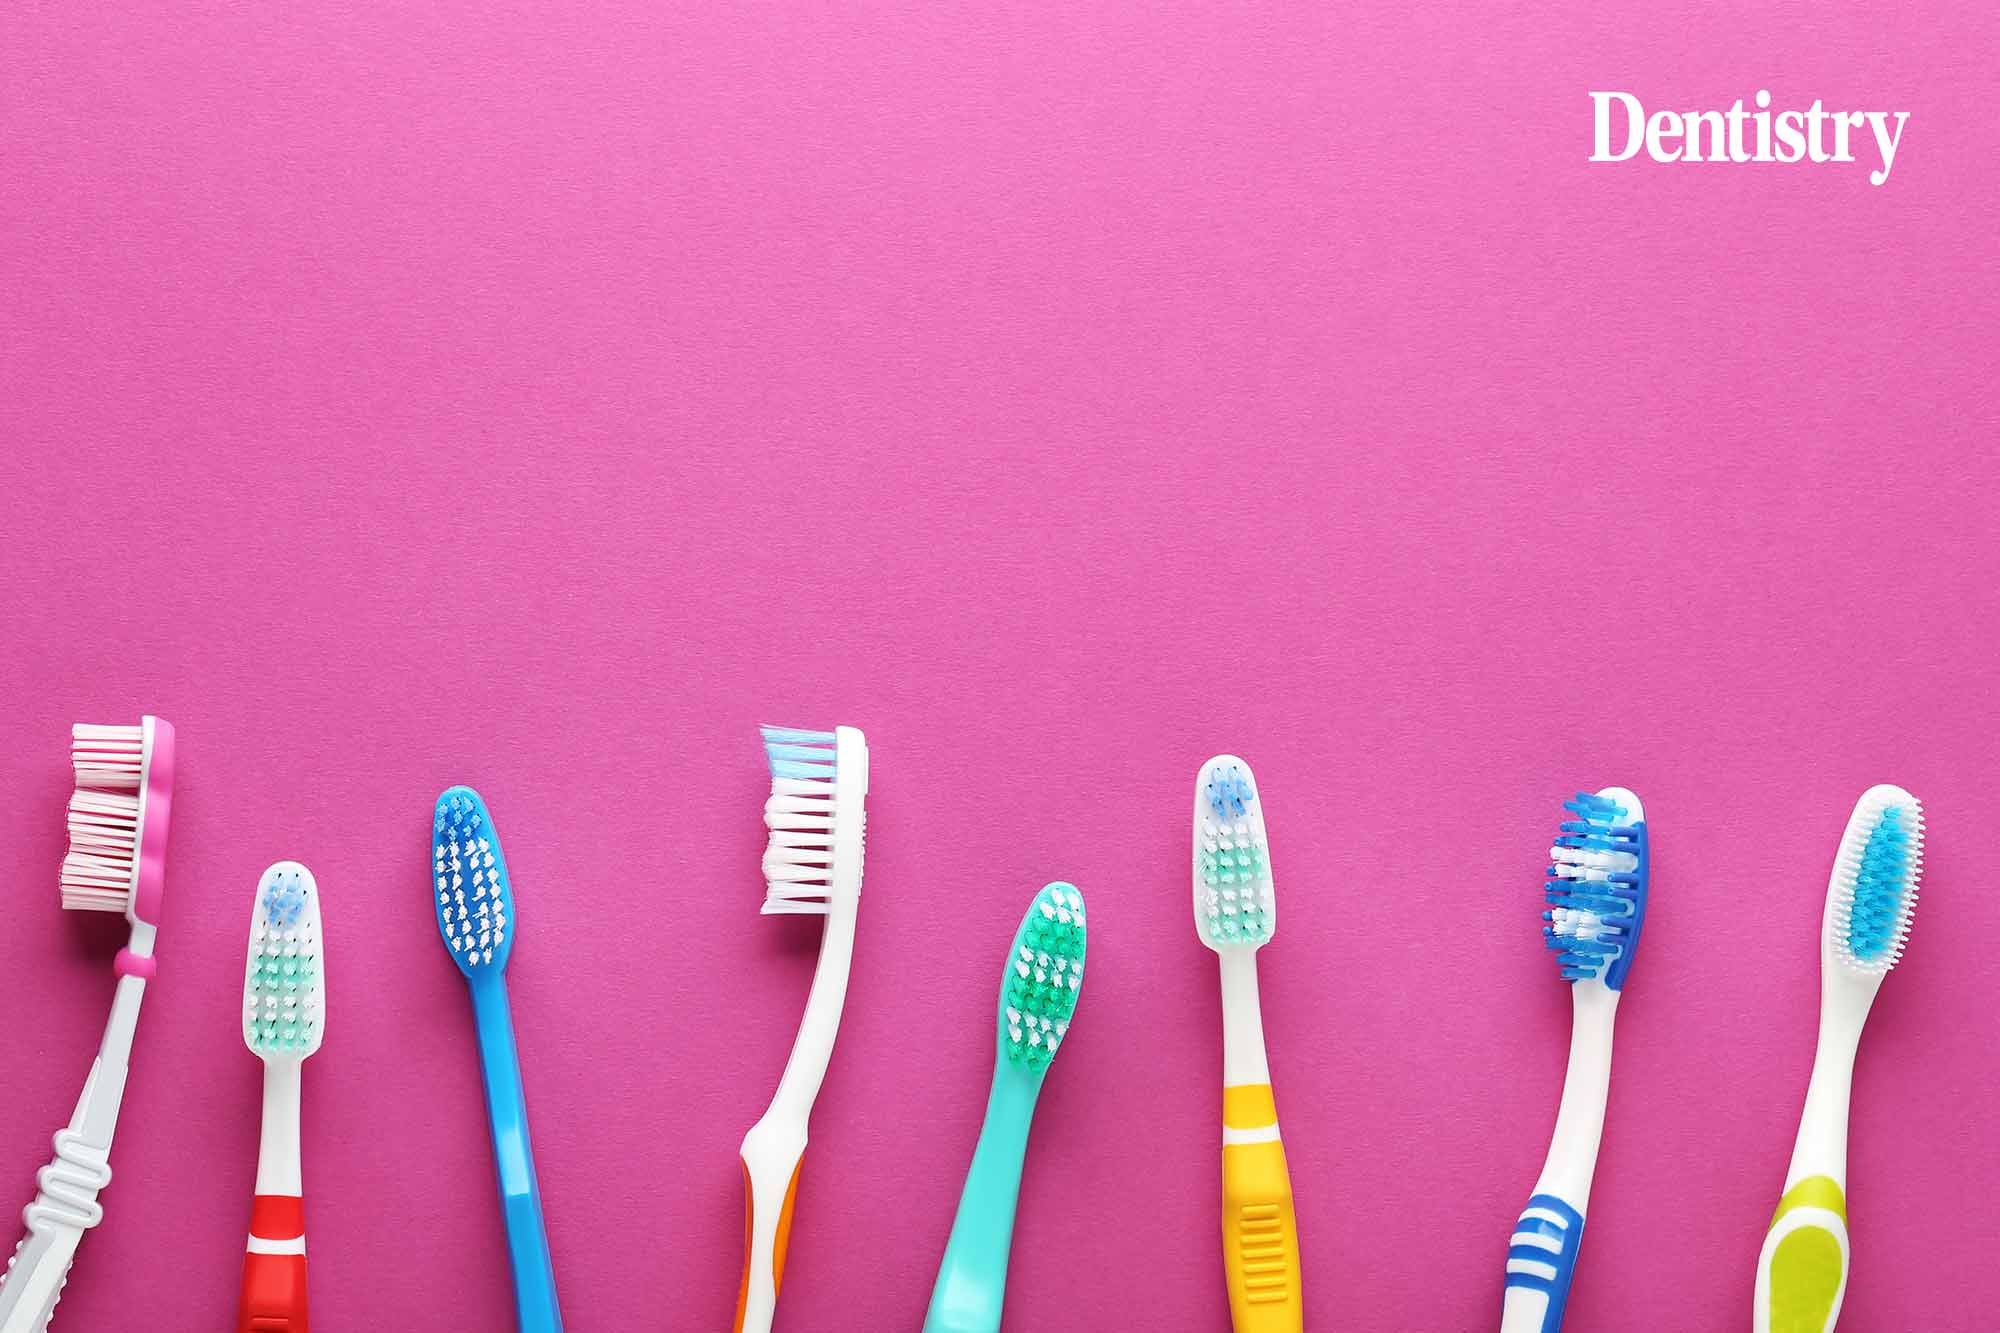 How do you decide which toothbrush to recommend?